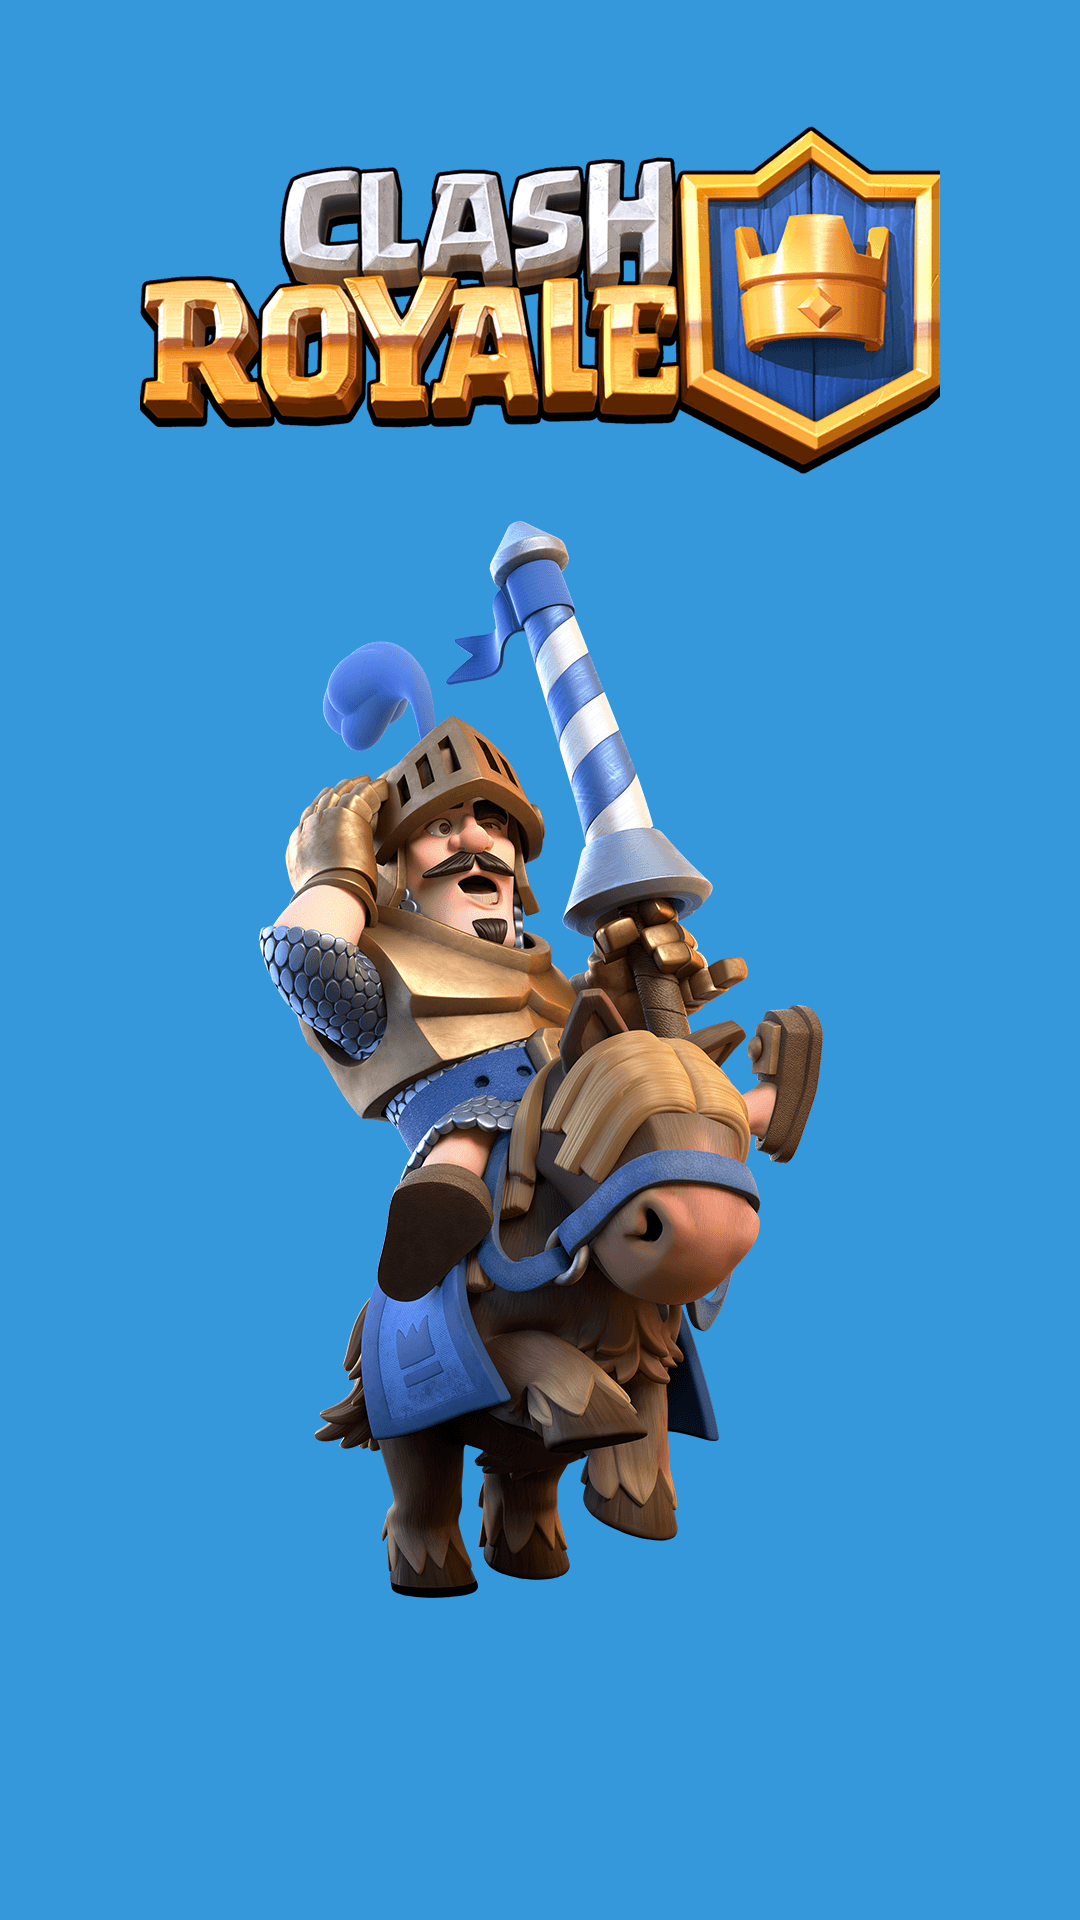 The Blue Prince Clash Royale Games iPhone Wallpaper